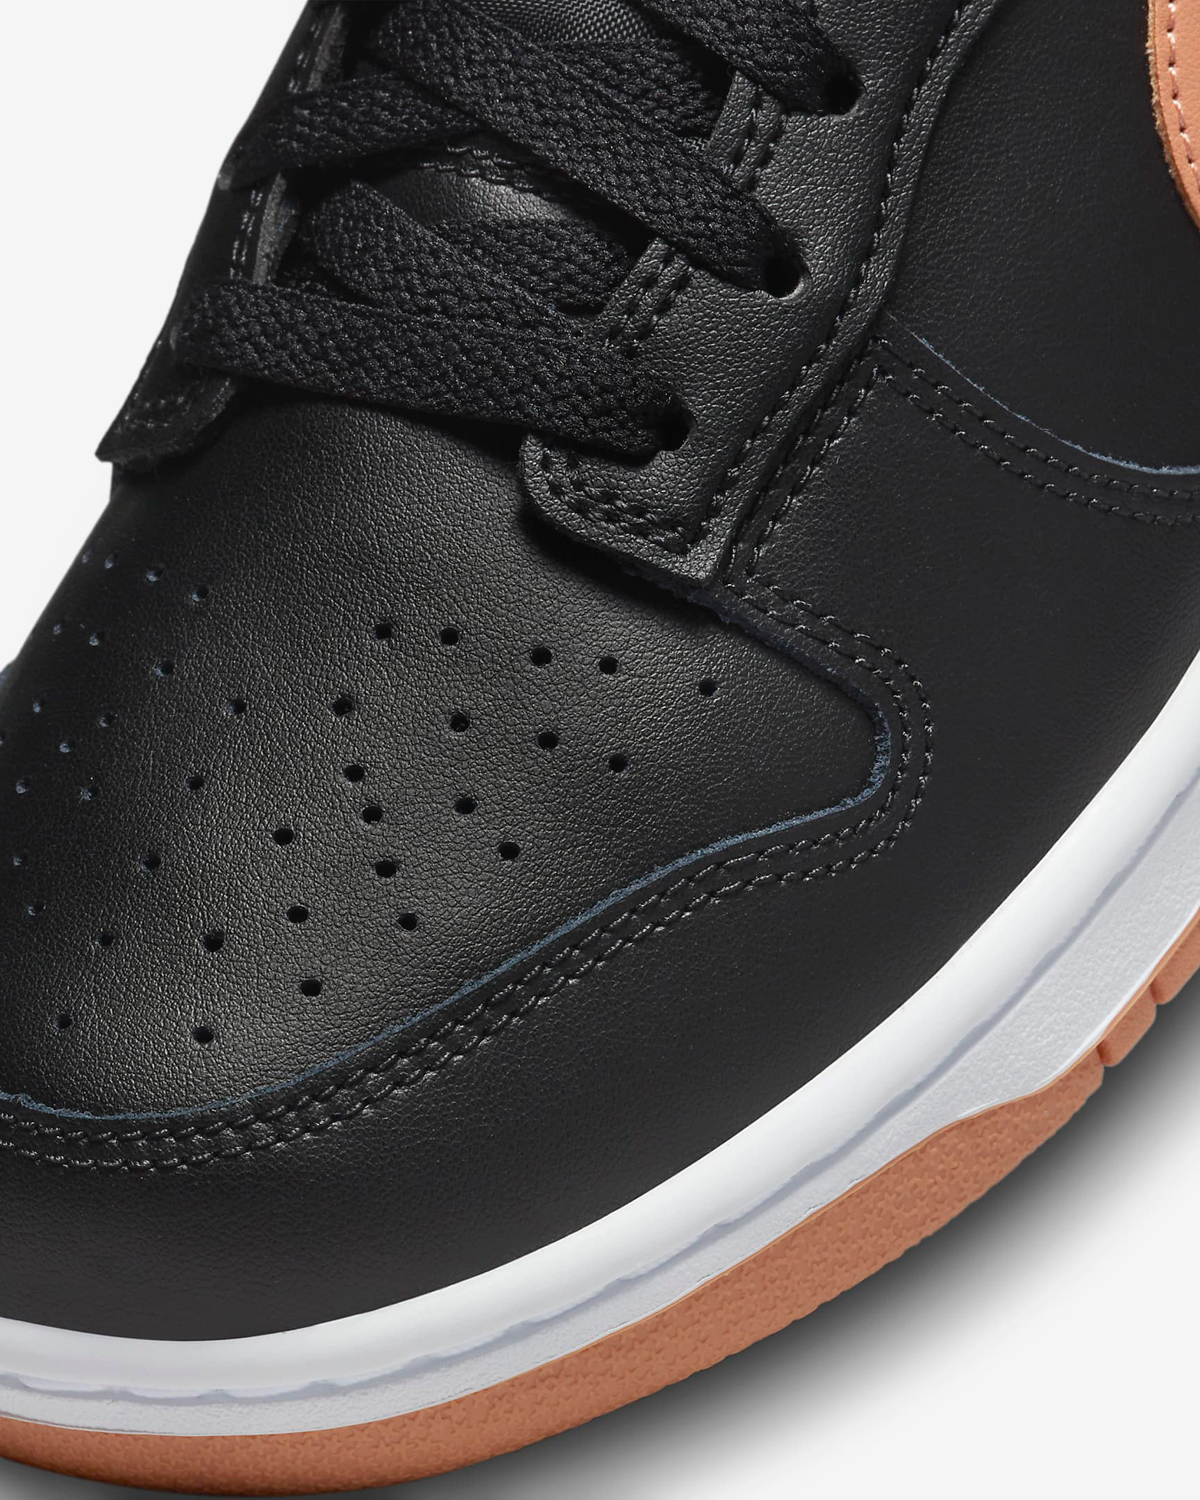 Nike-Dunk-Low-Black-Amber-Brown-Release-Date-8